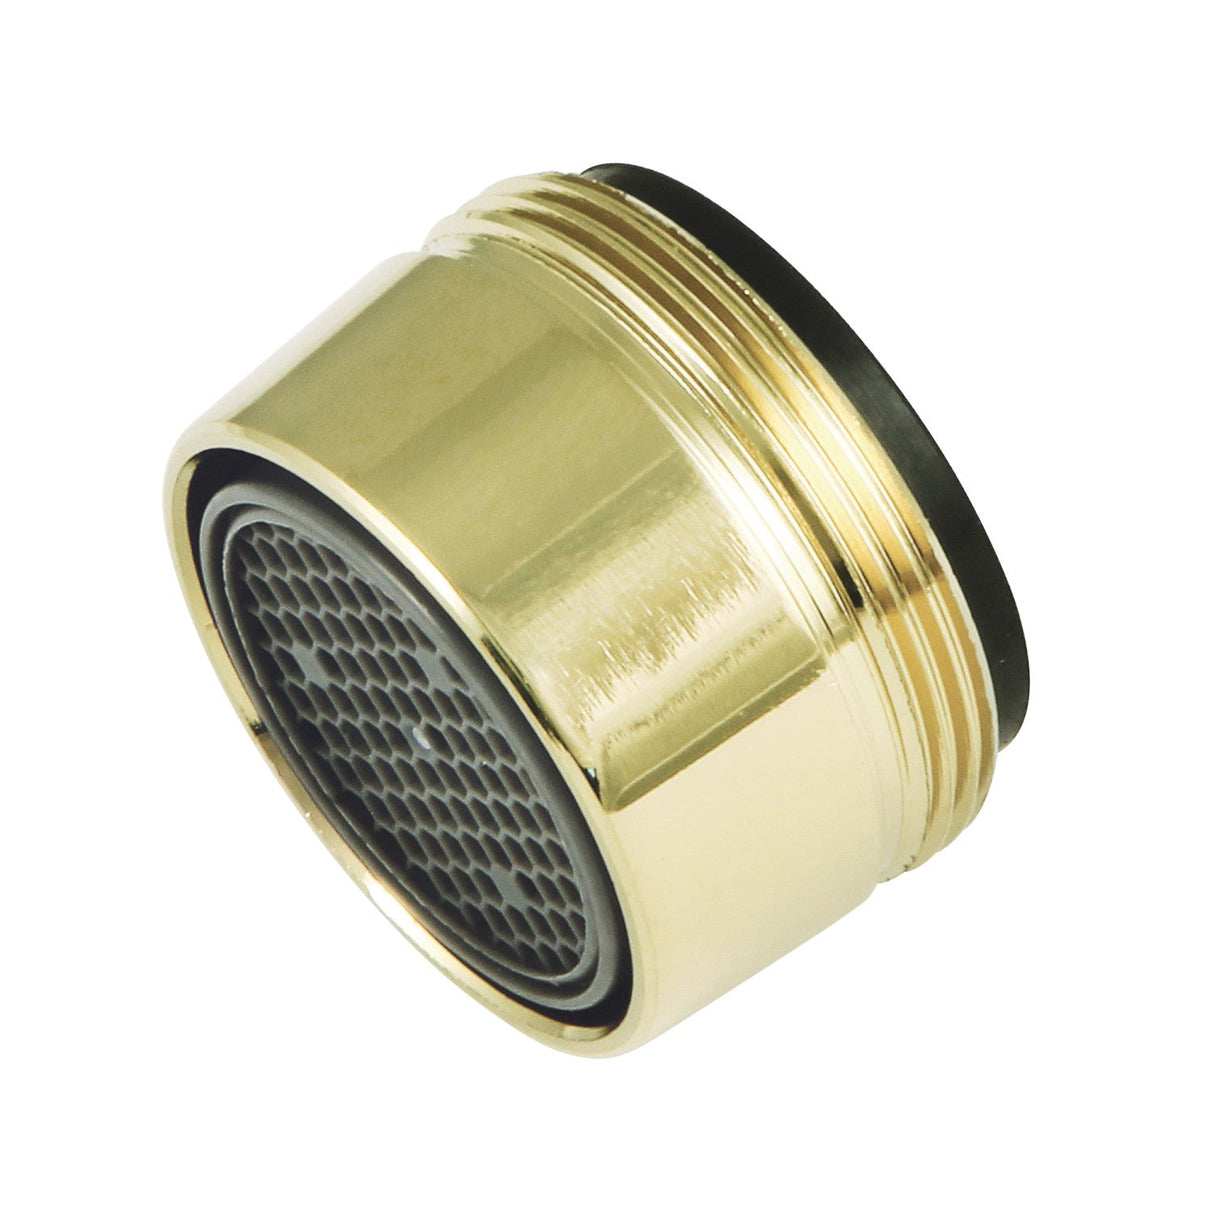 Cal Green G15KBSA952 1.5 GPM Neoperl Male Aerator, Polished Brass